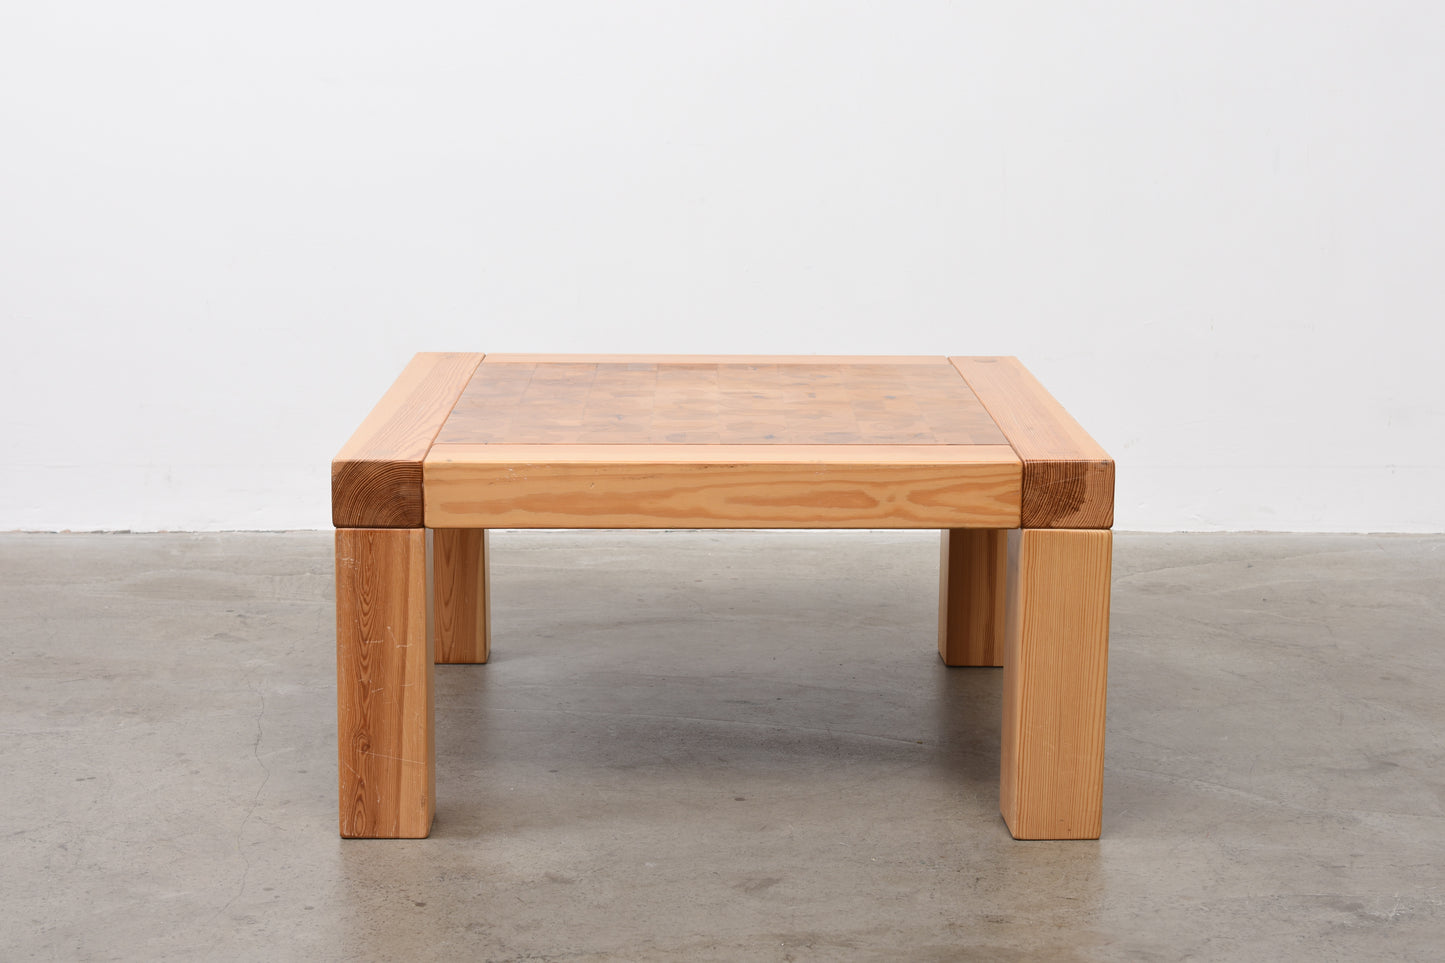 1970s pine coffee table by Christer Lundén